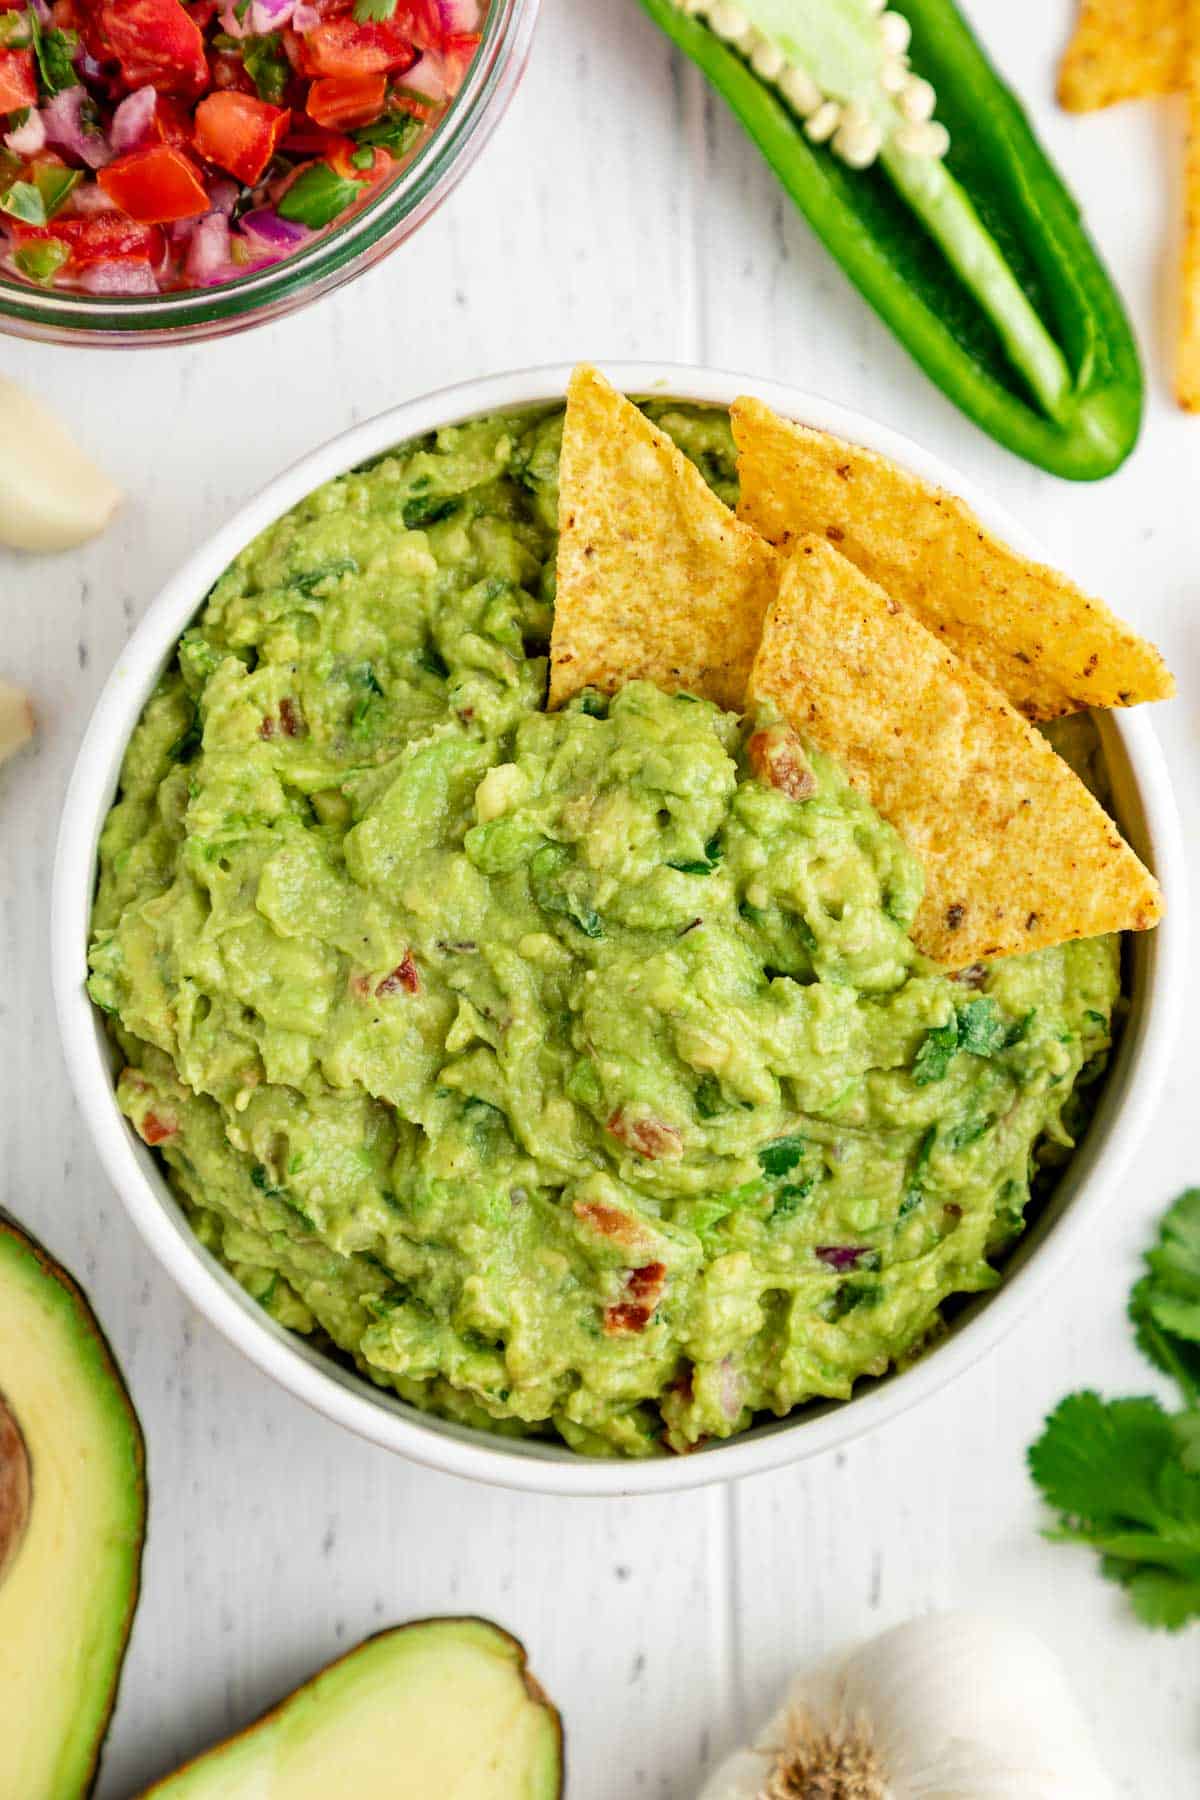 https://www.purelykaylie.com/wp-content/uploads/2021/04/chips-and-guacamole-in-bowl-1.jpg